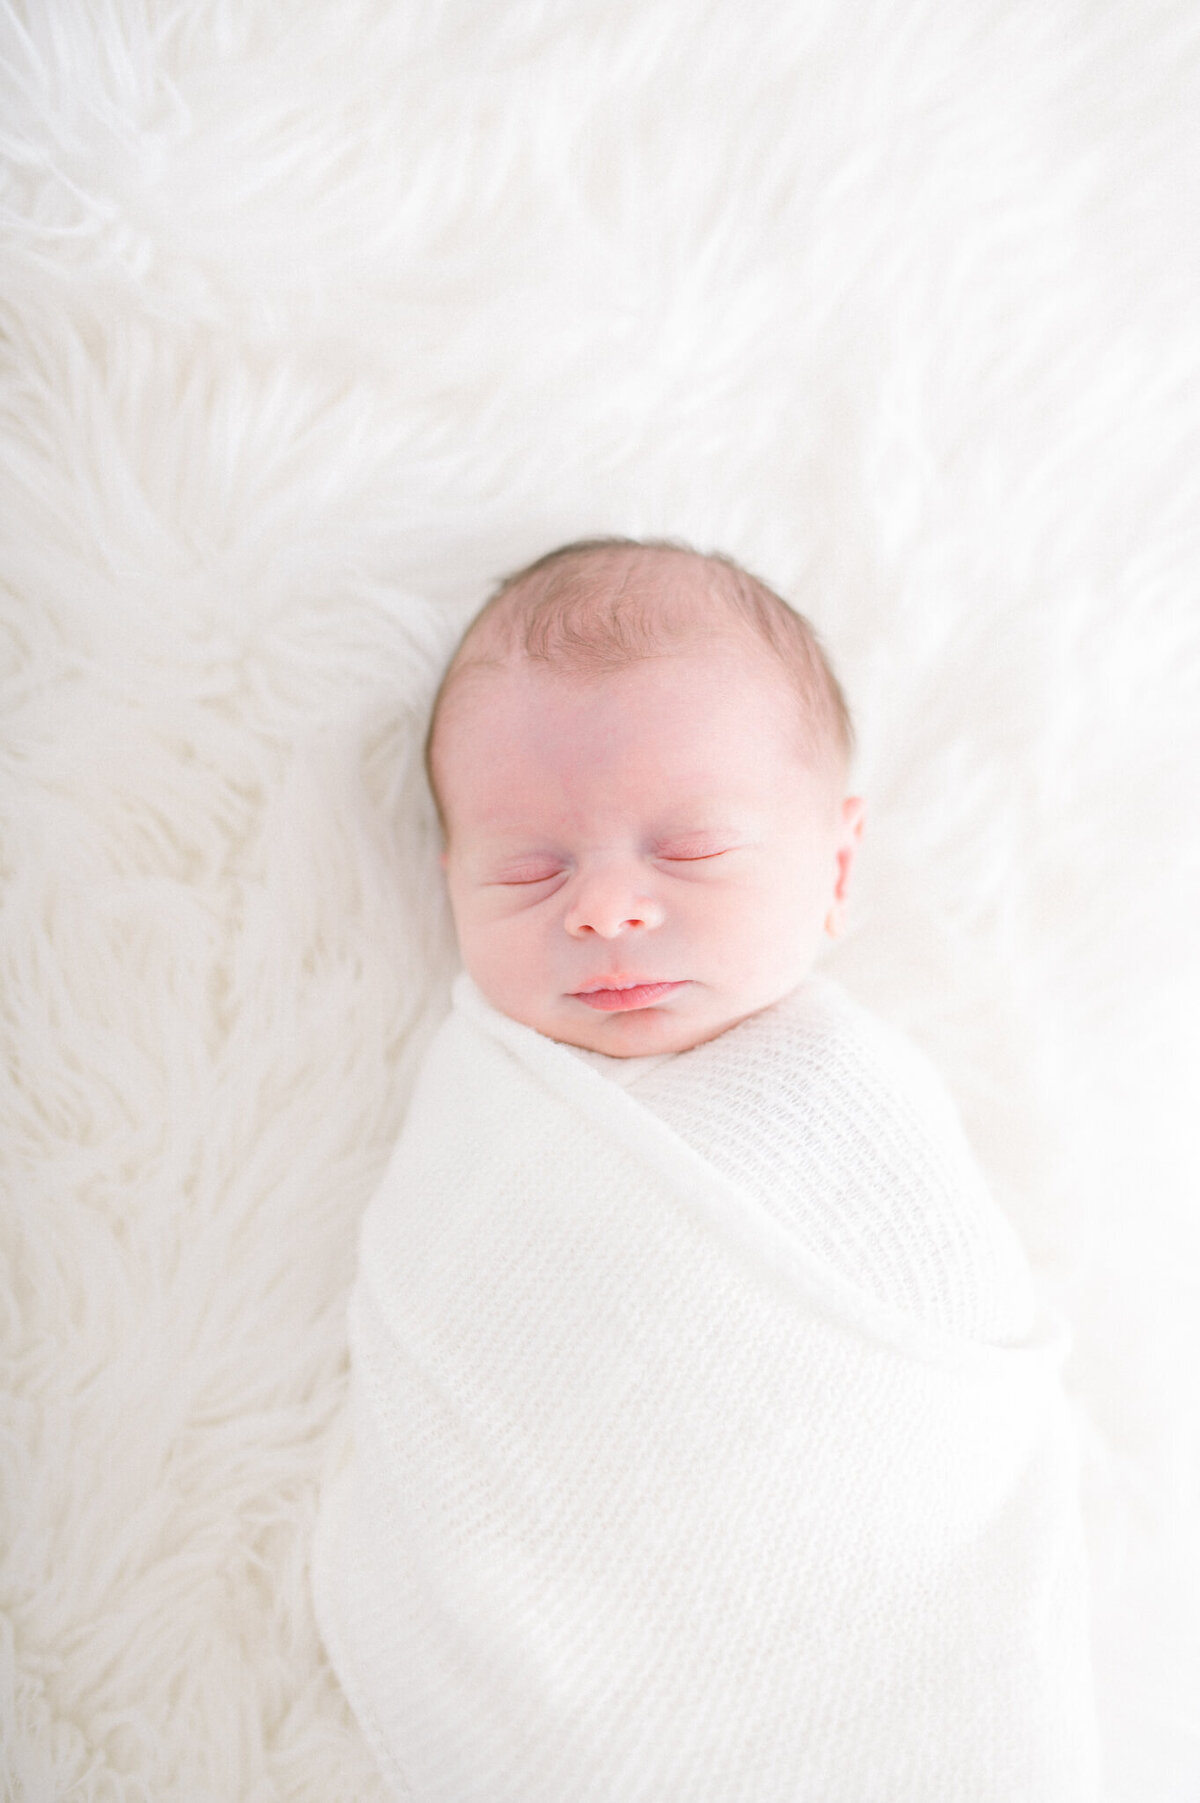 newborn boy sleeps while being wrapped for his portrait. Captured in studio by Niagara newborn photographer Kristine Marie Photography